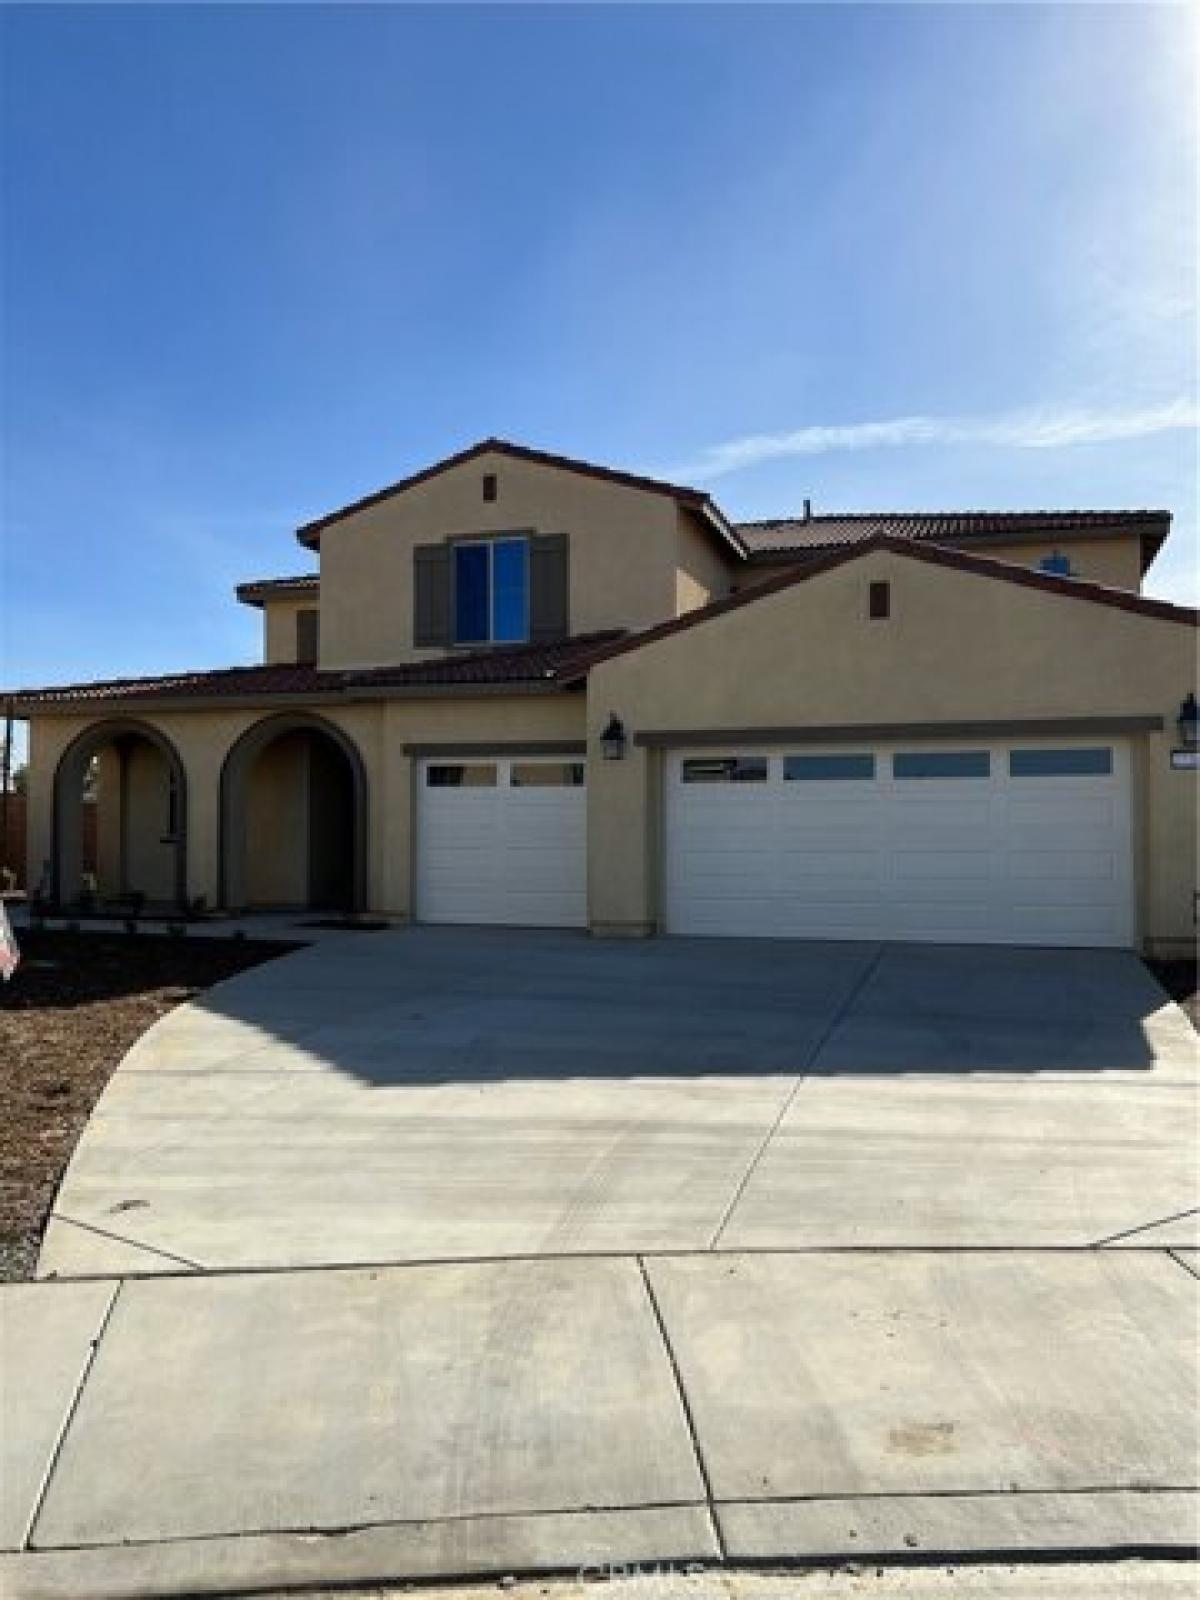 Picture of Home For Rent in Menifee, California, United States